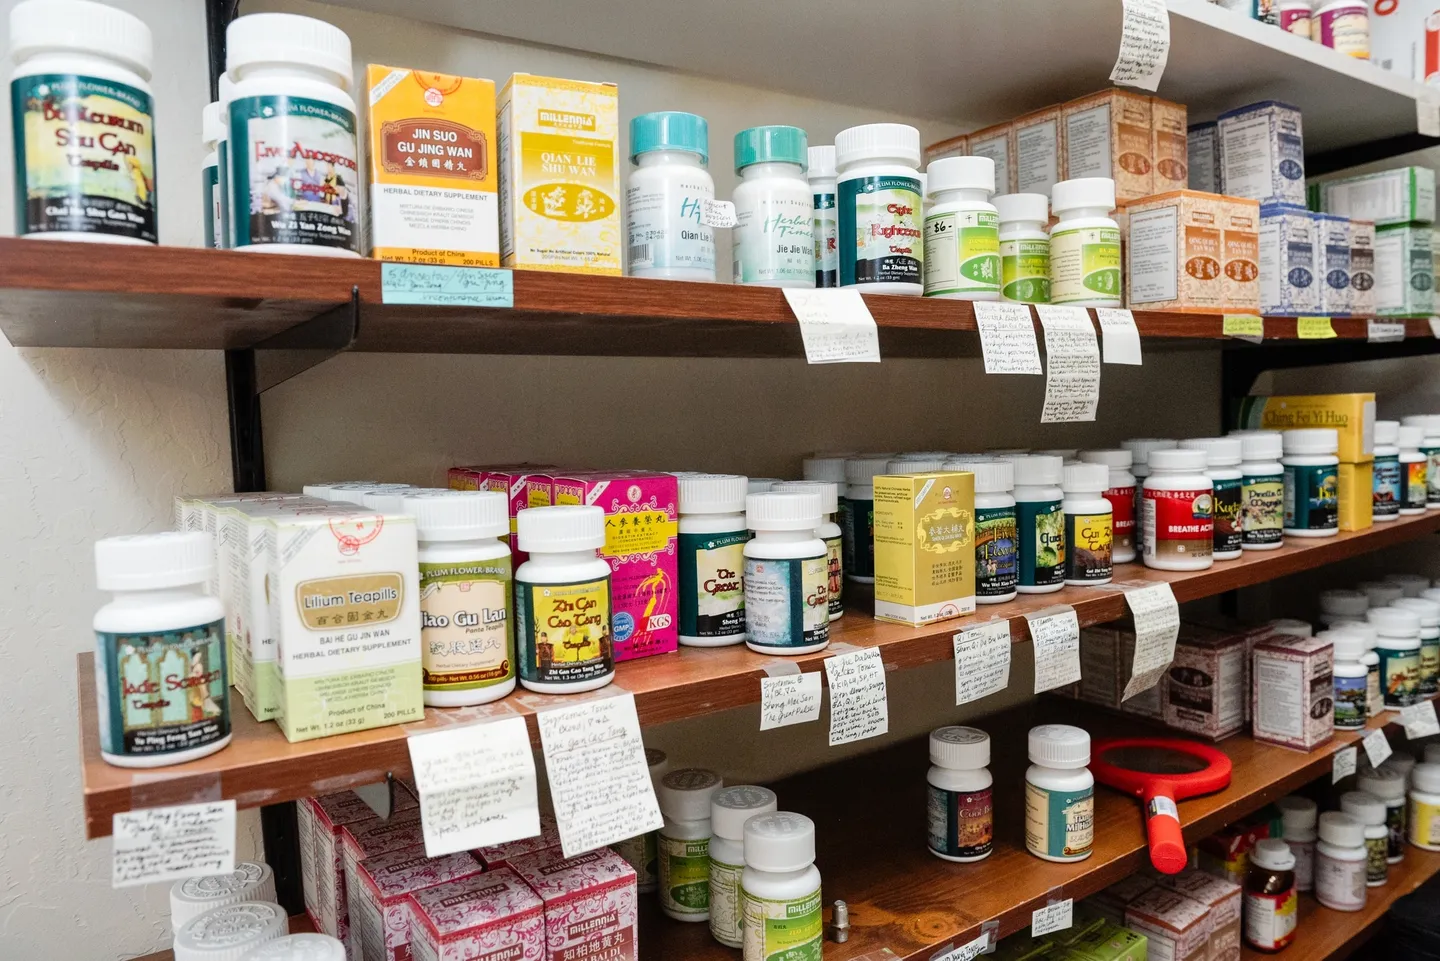 Inside our Pharmacy, we offer many different brands of Herbal Formulas.